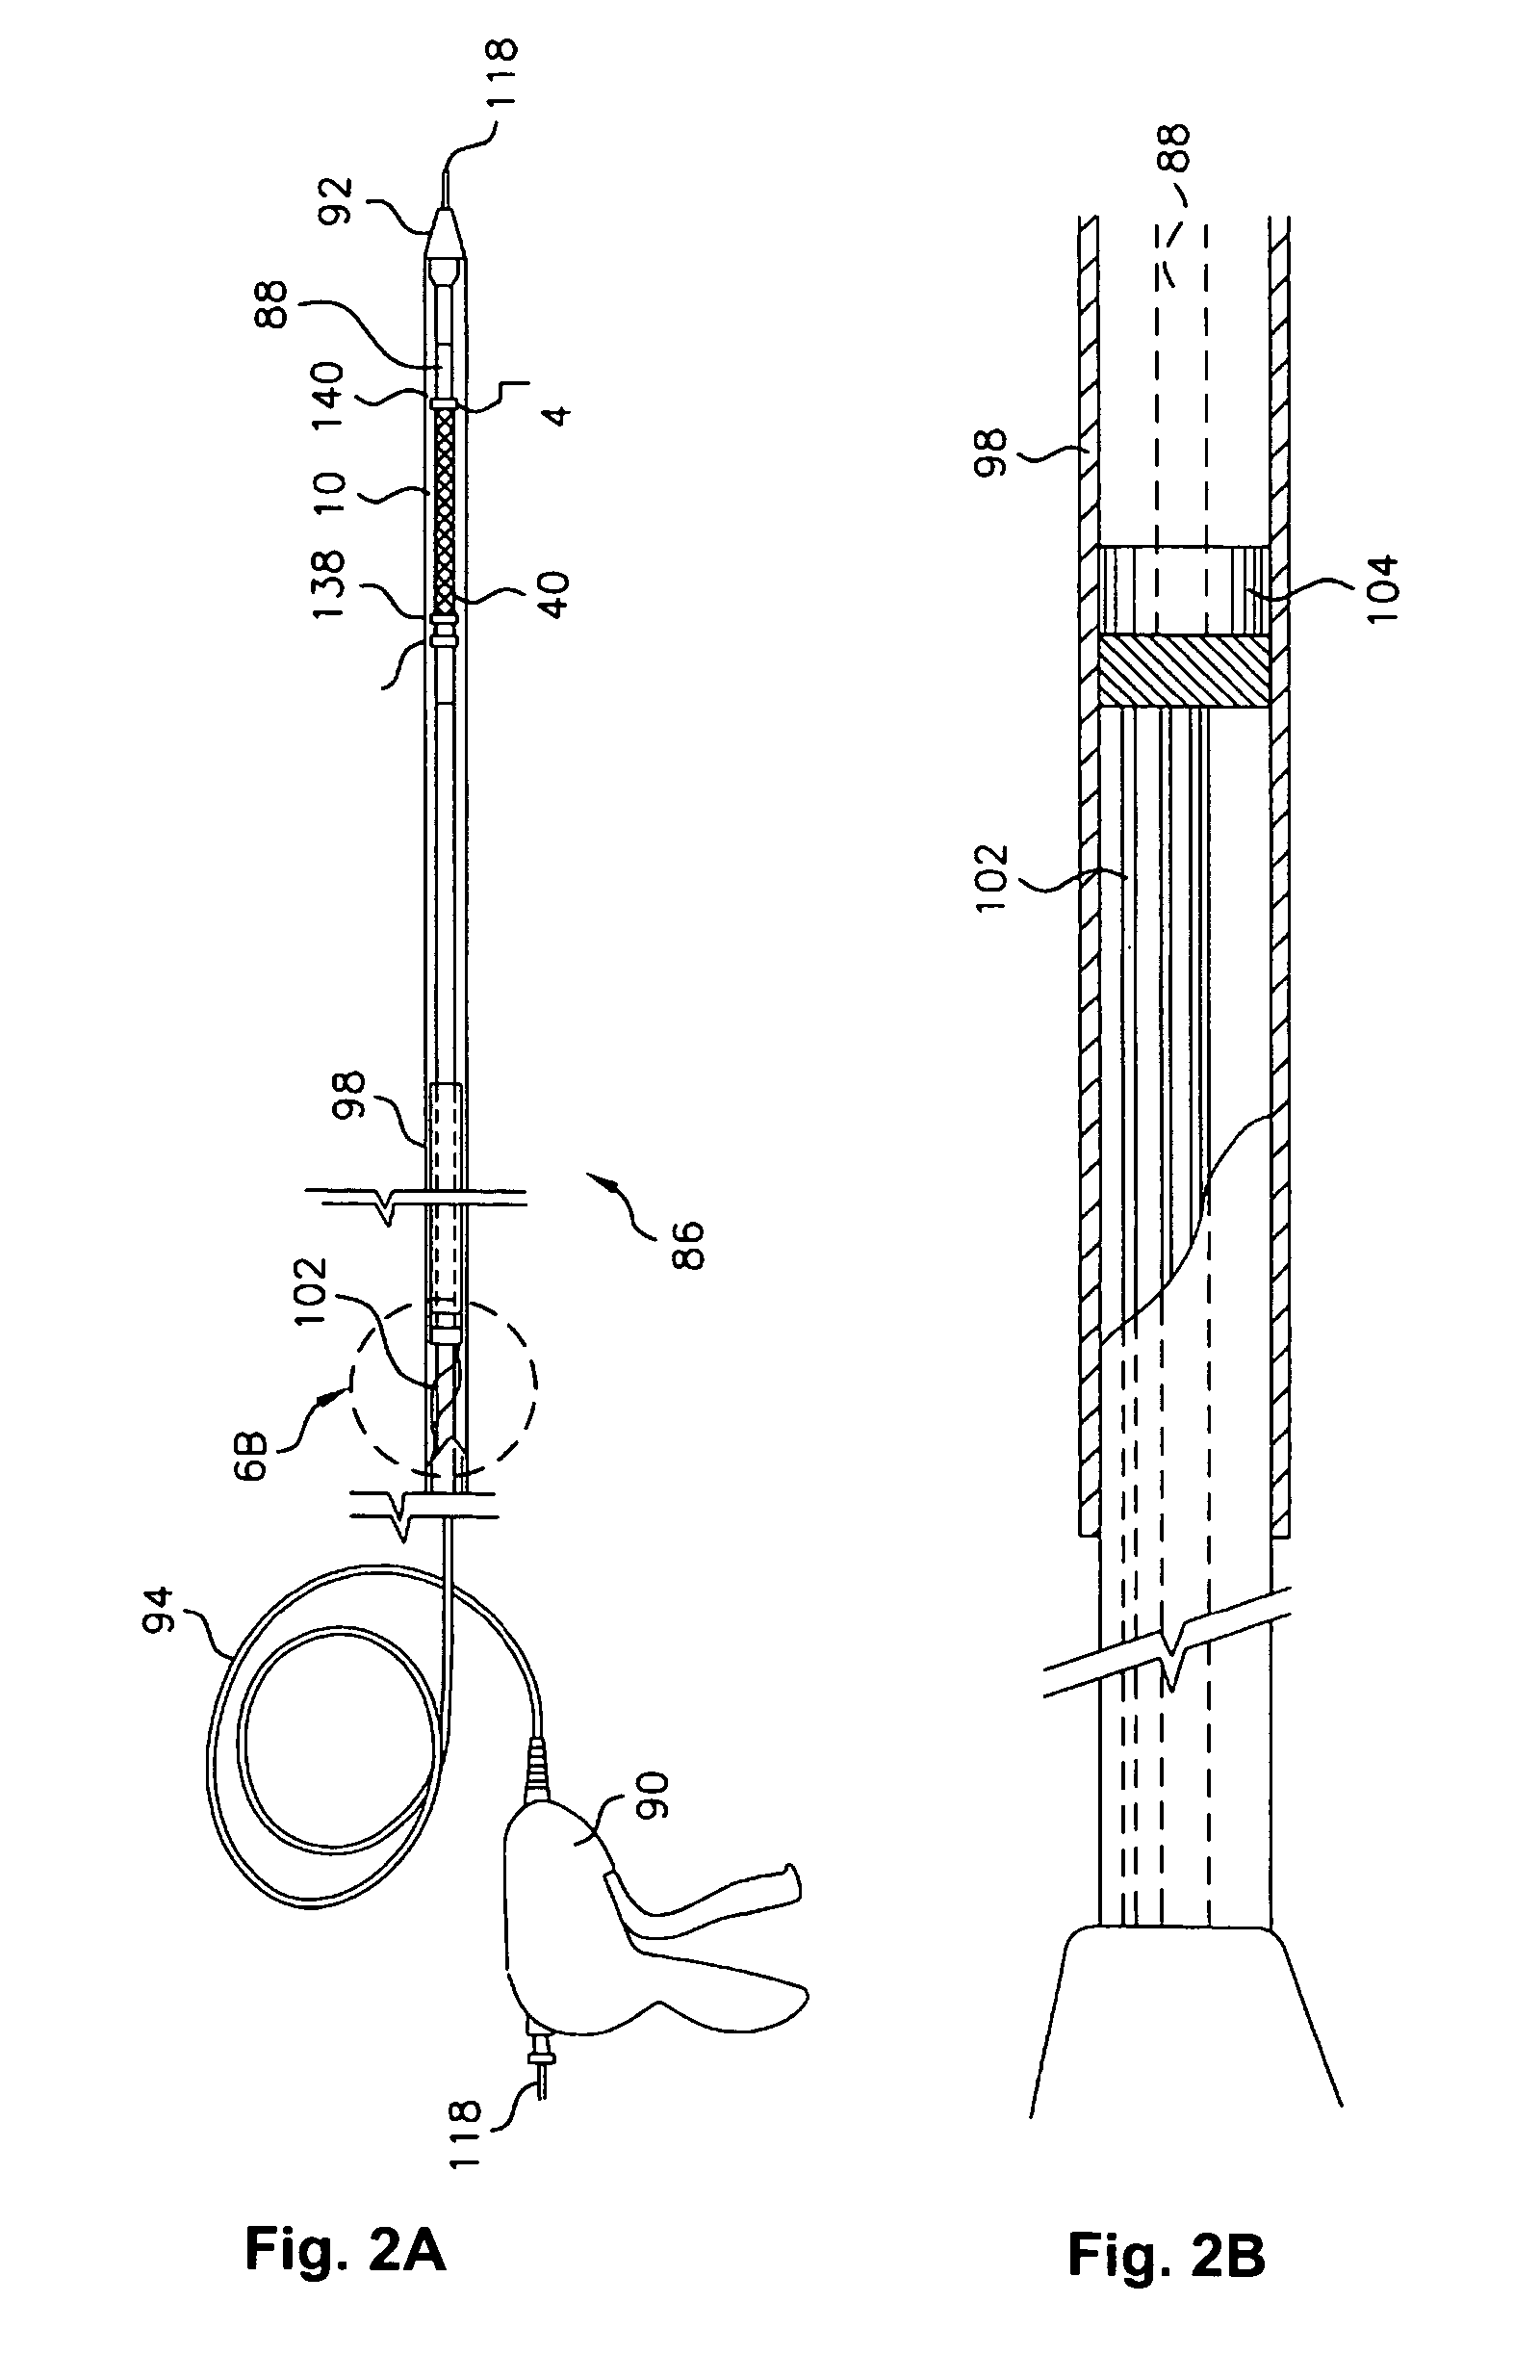 Electroactive polymer actuated sheath for implantable or insertable medical device